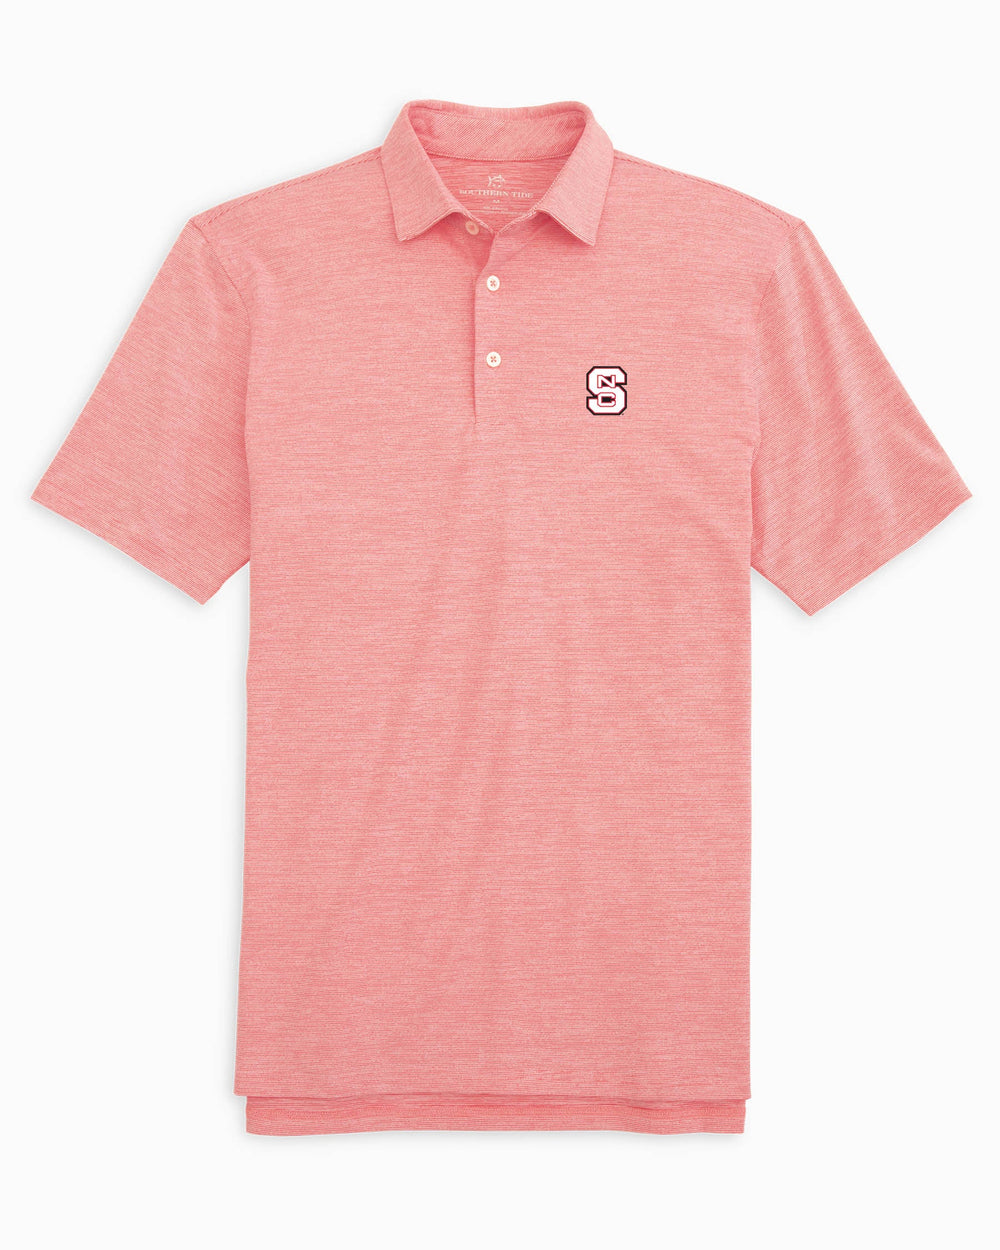 The front of the NC State Driver Spacedye Polo Shirt by Southern Tide - Varsity Red